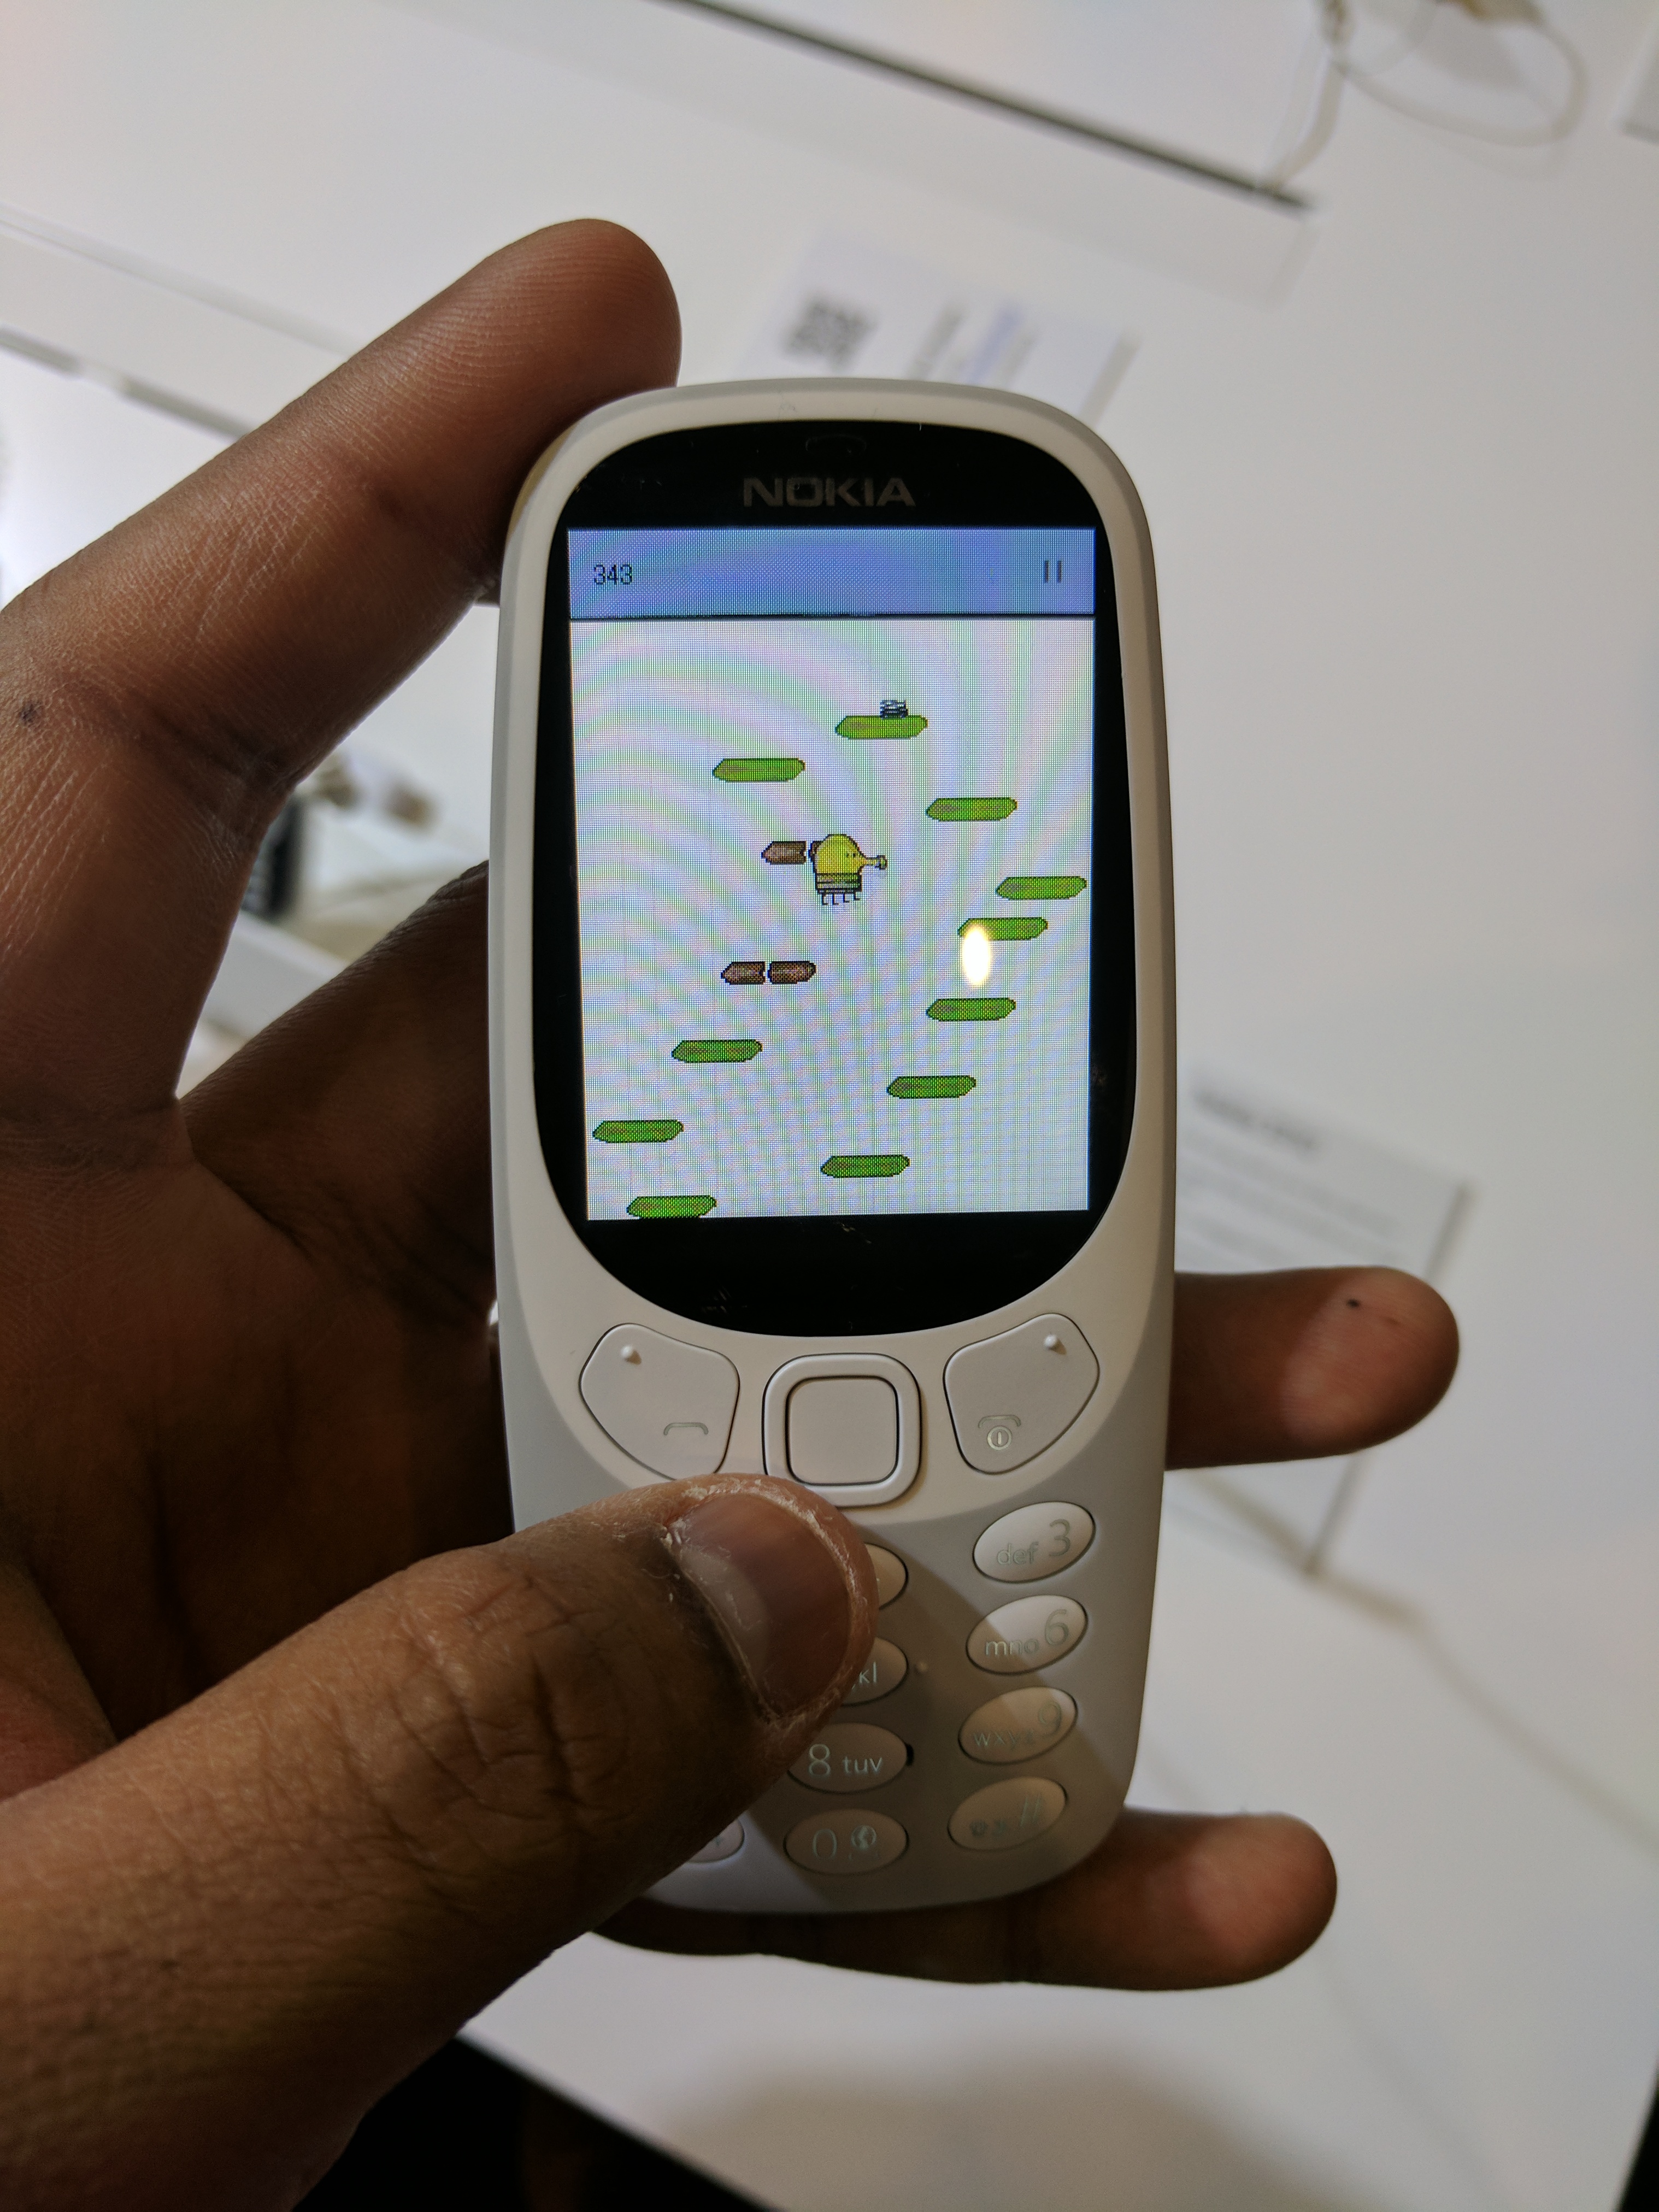 Nokia 3310 3G's Snake: Was it worth the update? – GameAxis